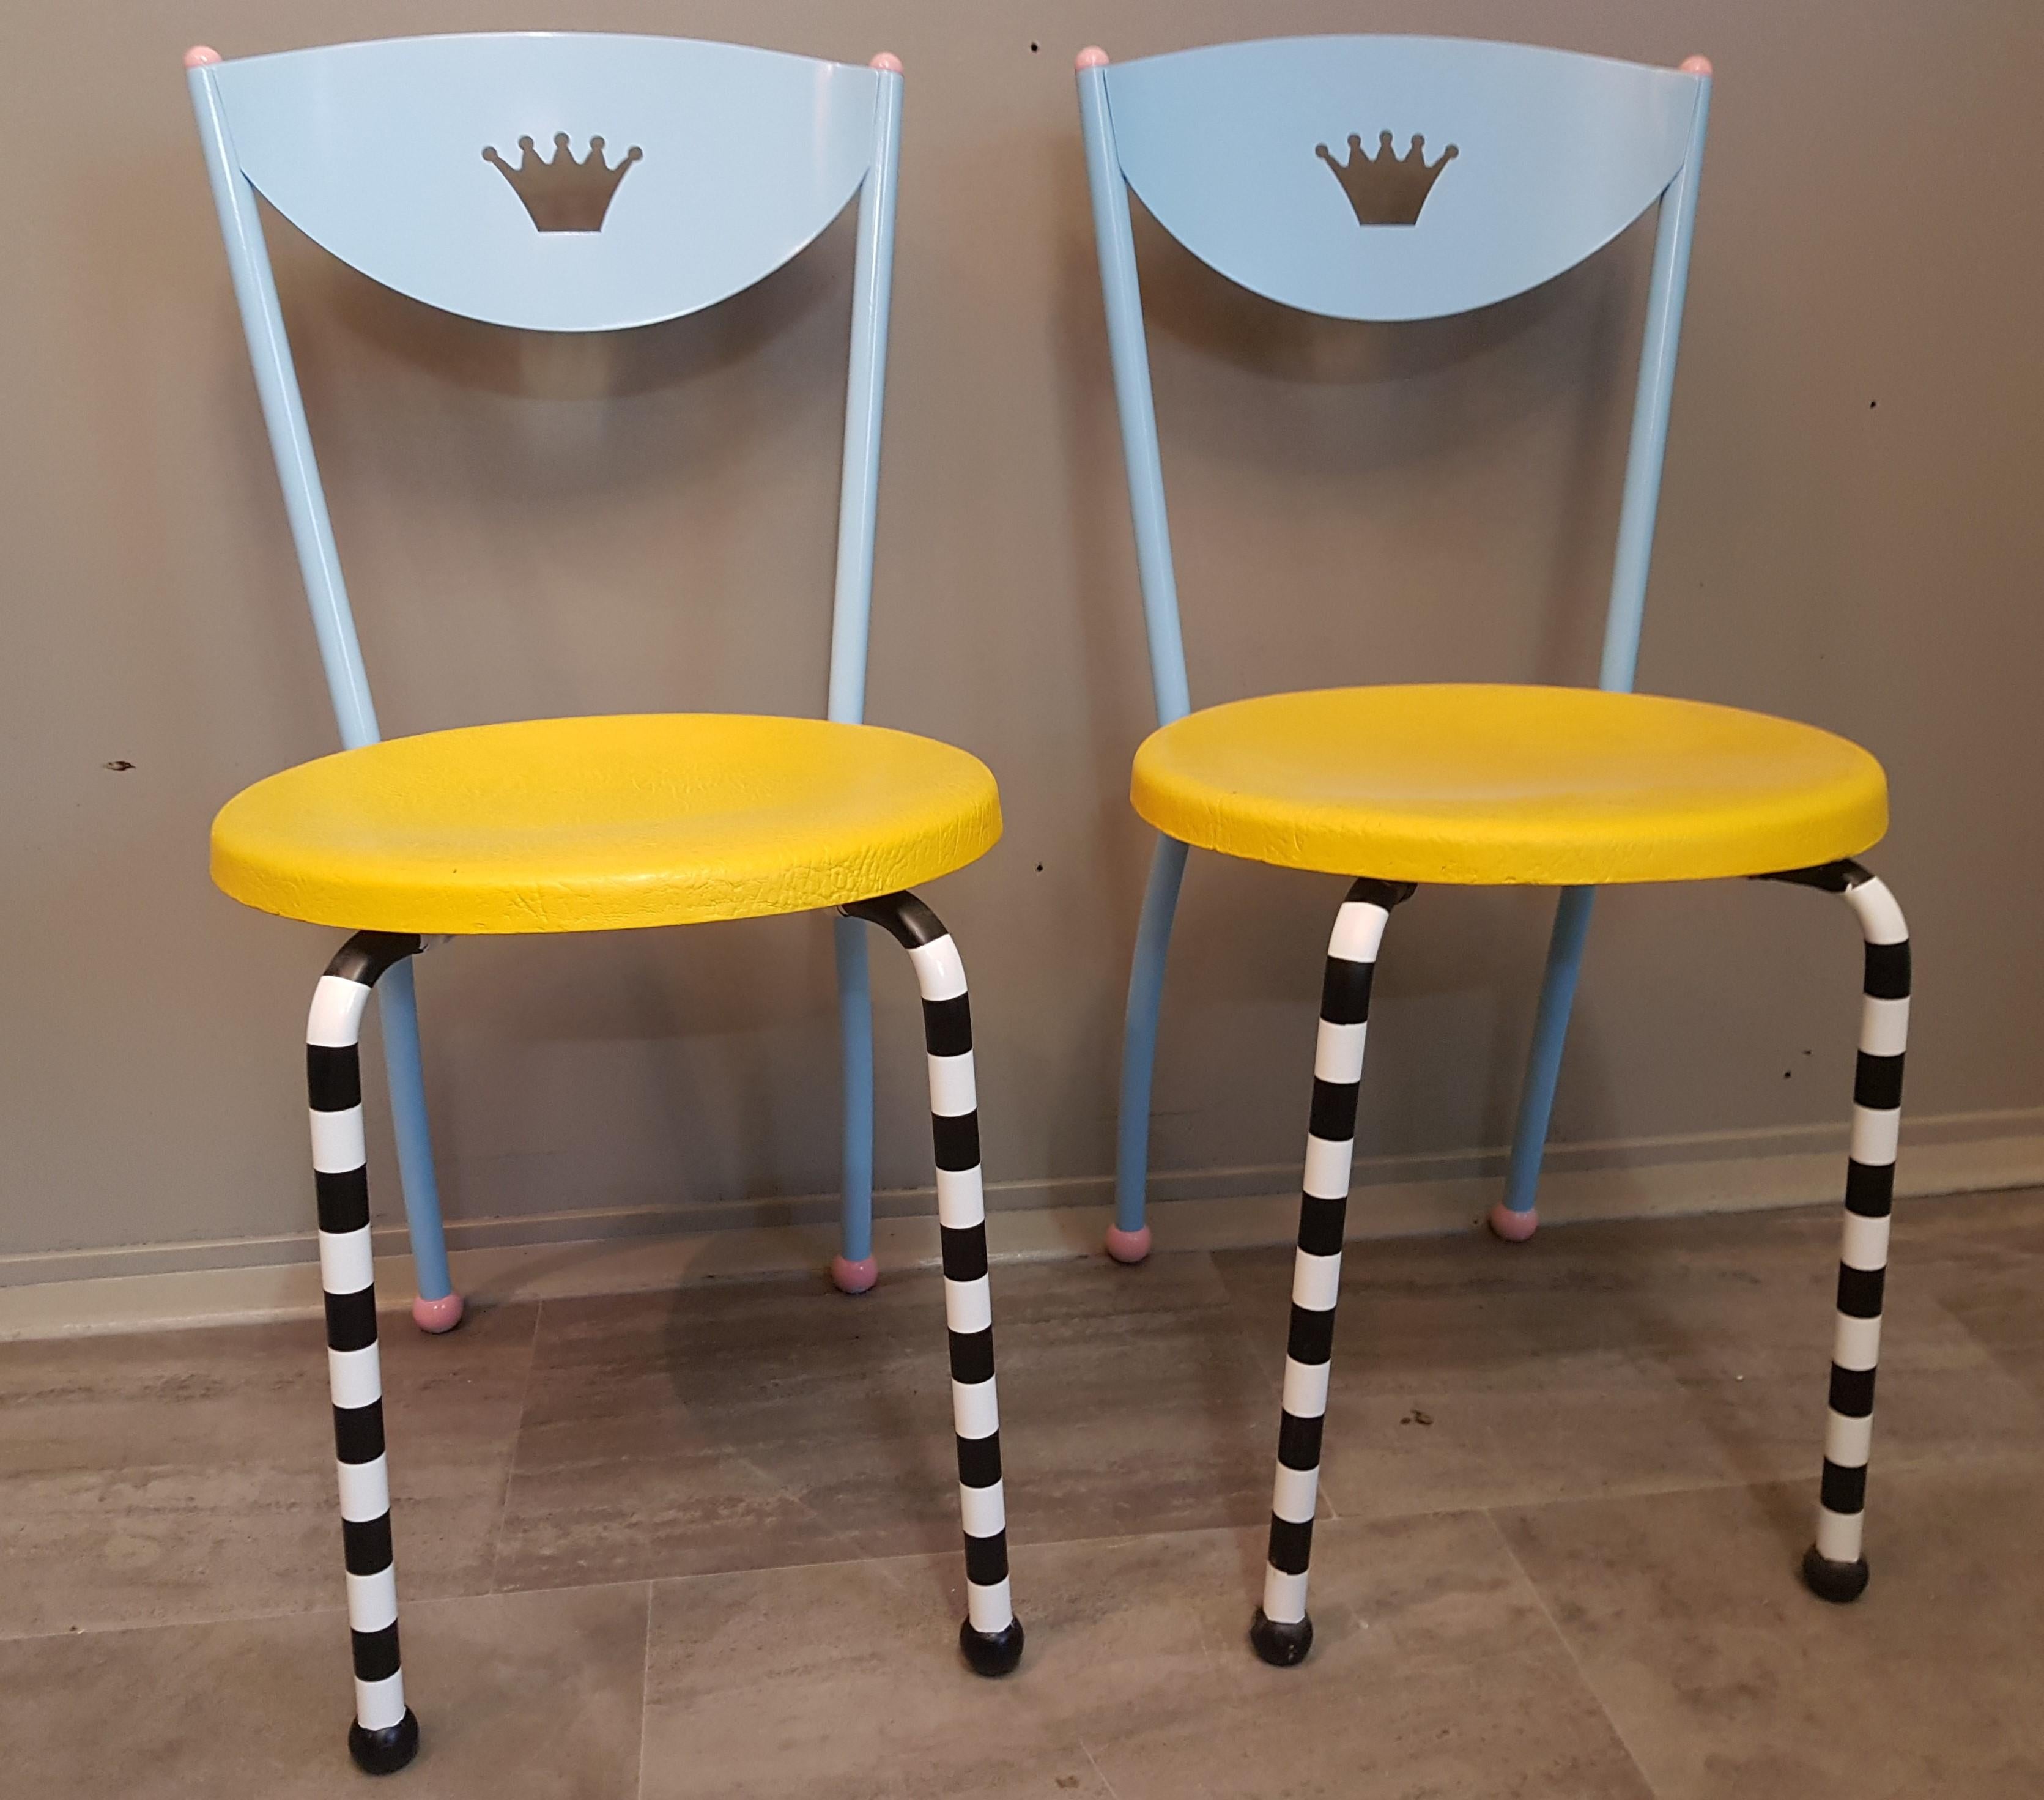 8 Memphis Postmodern Dining Chairs Manner of Michele De Lucci, Italy, 1980s For Sale 7